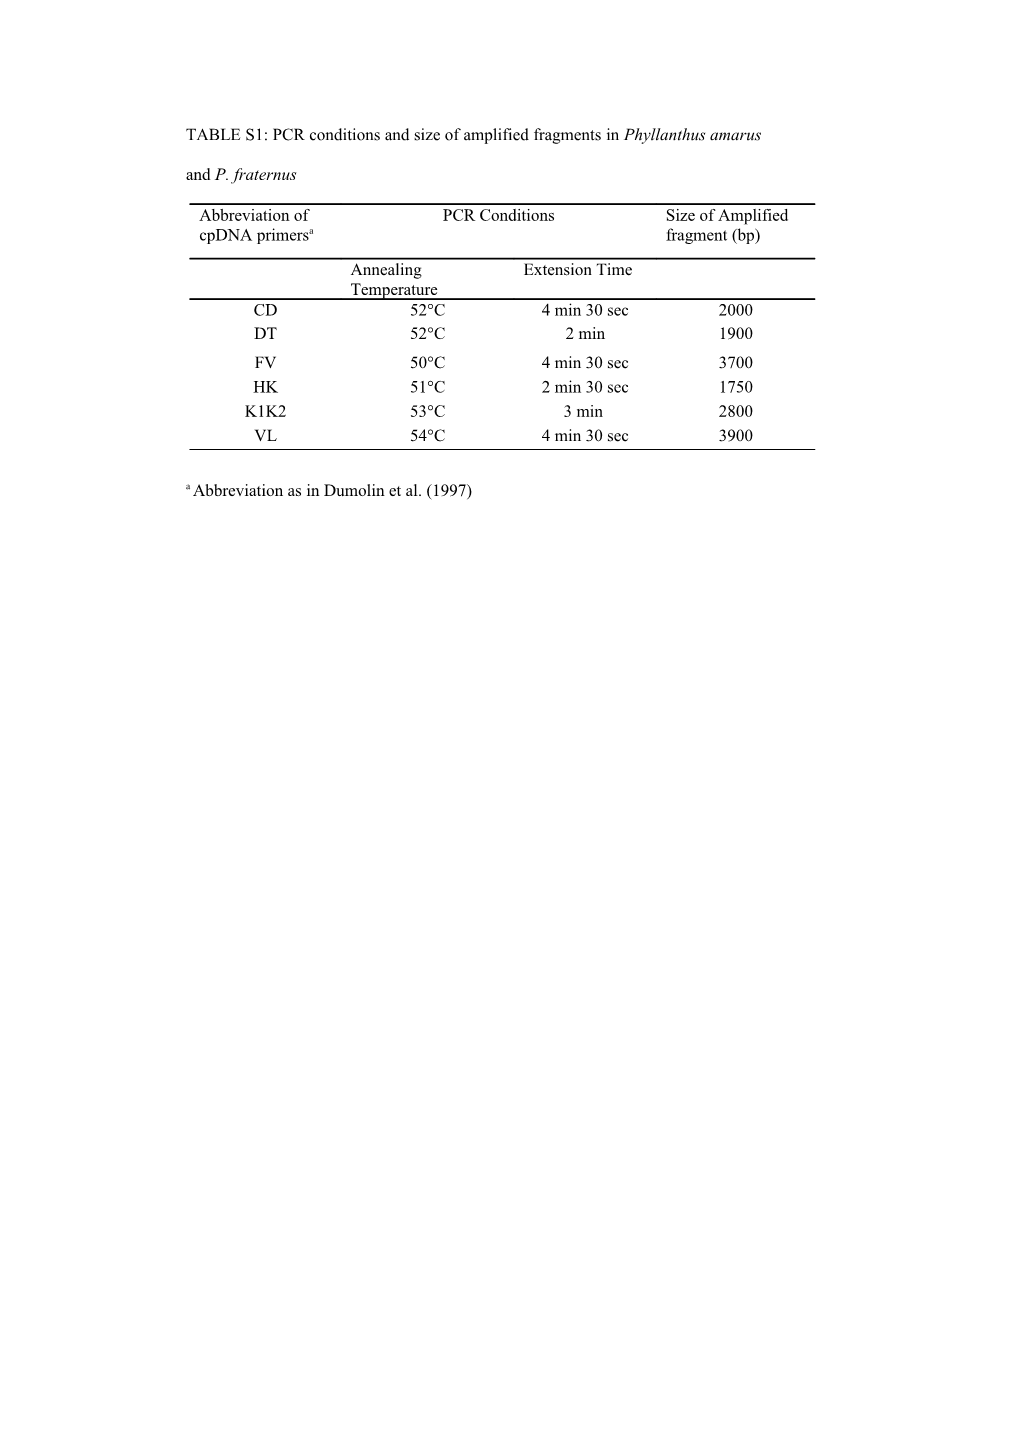 TABLE S1: PCR Conditions and Size of Amplified Fragments in Phyllanthus Amarus